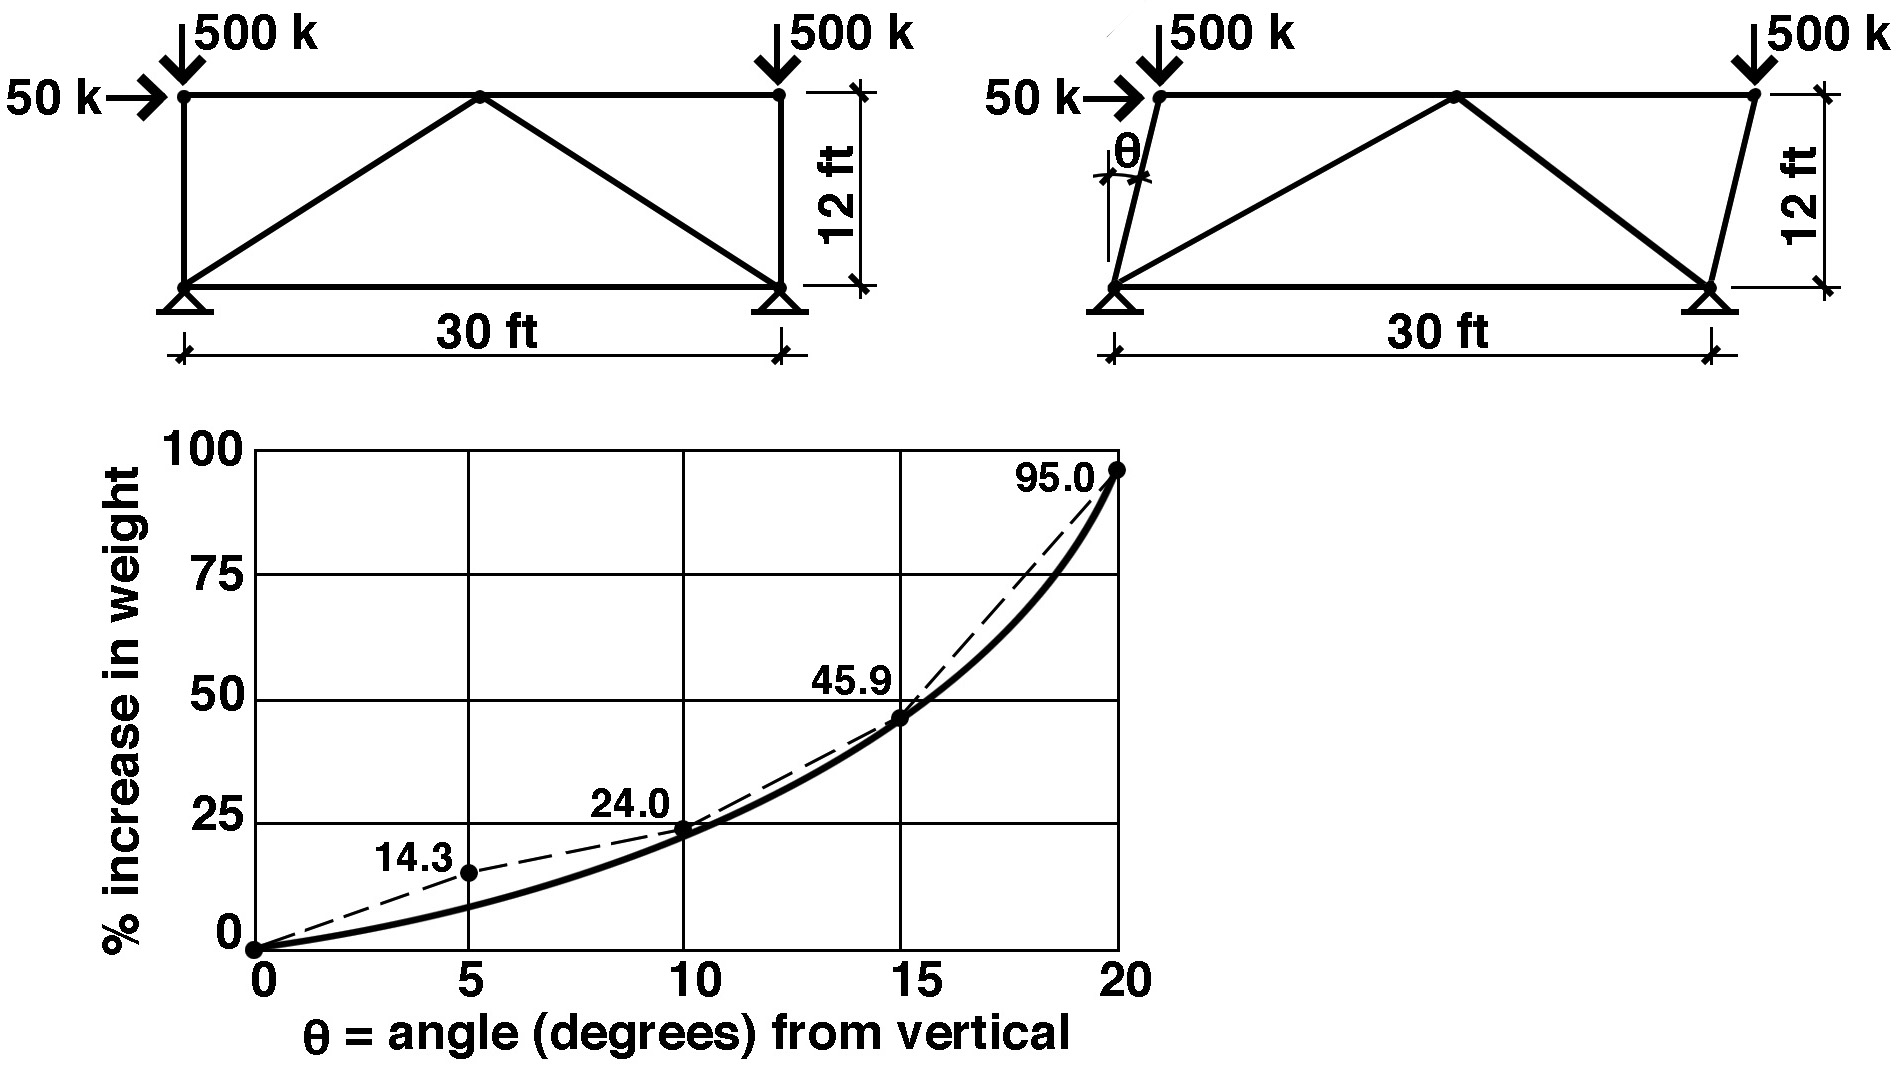 Graph showing increased weight of steel as frame is inclined.